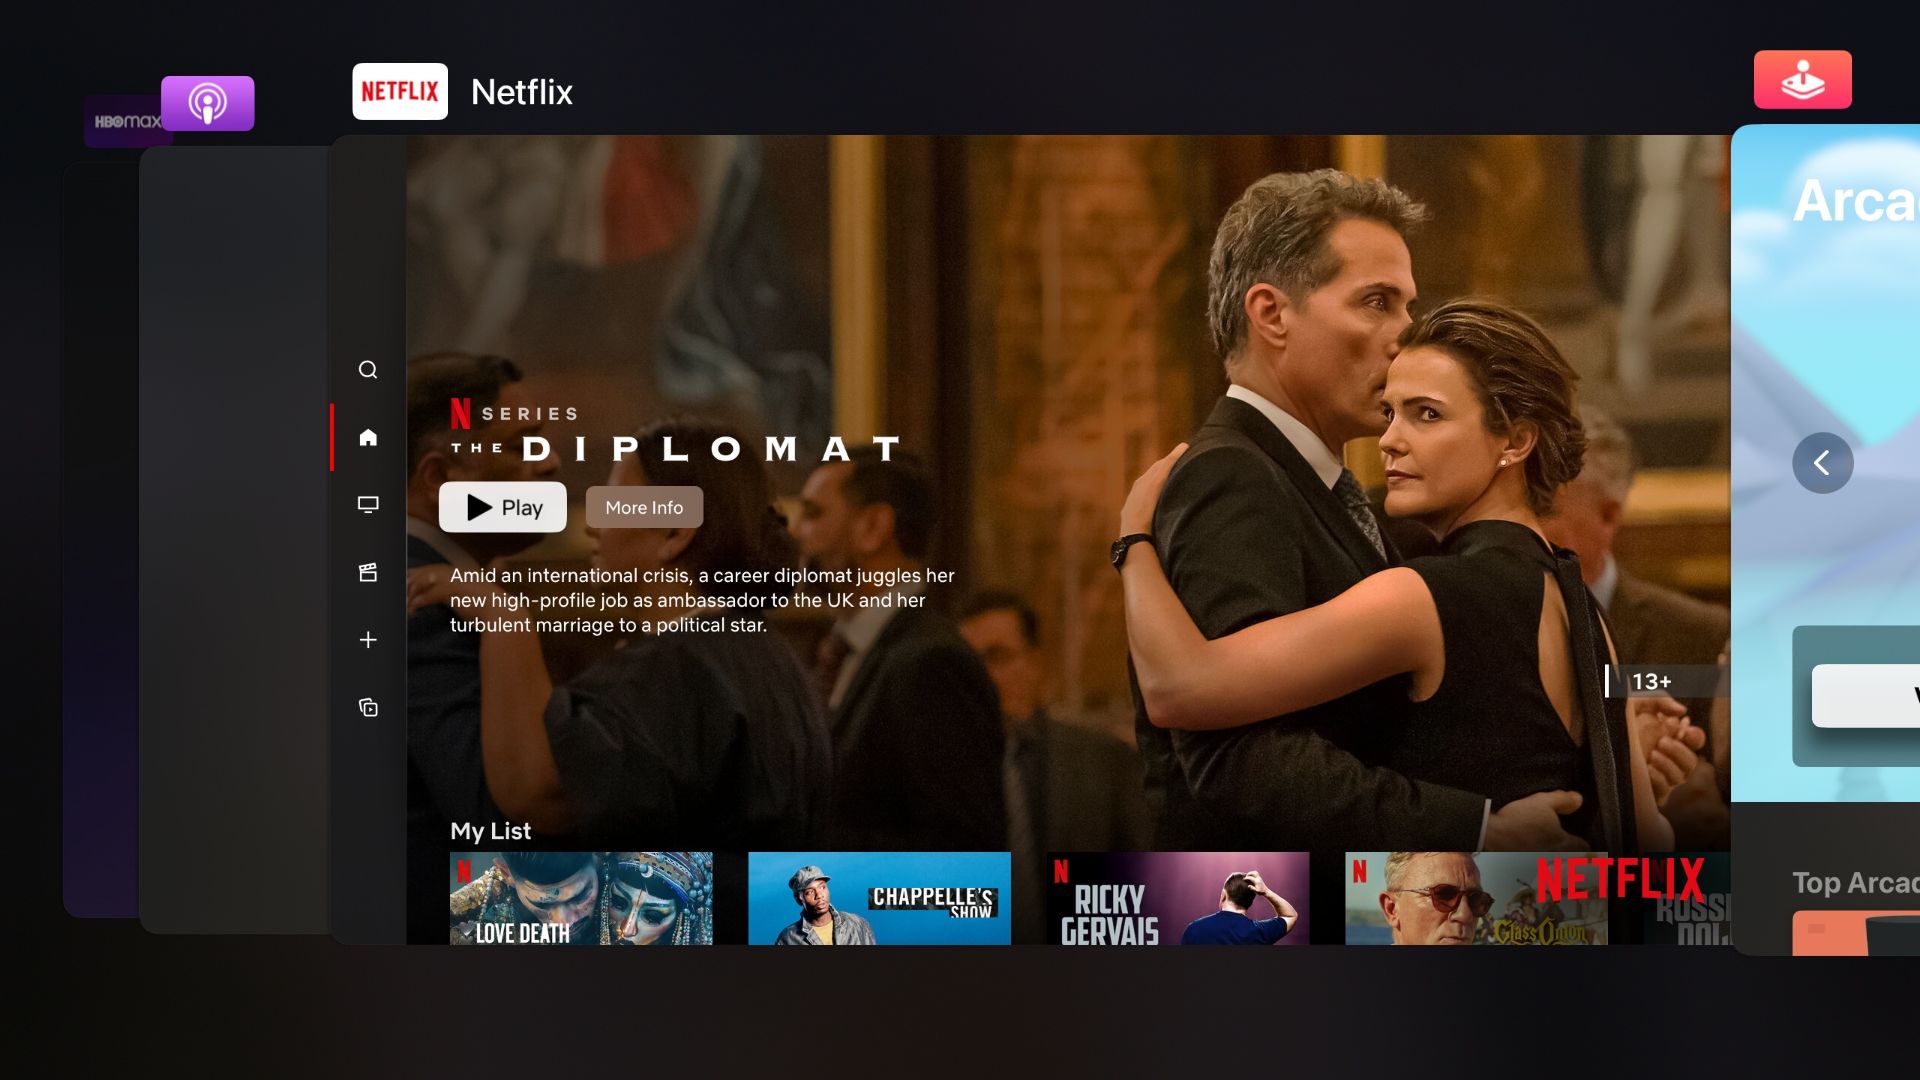 Apple TV screenshot showing the tvOS app switcher with the Netflix app in the center